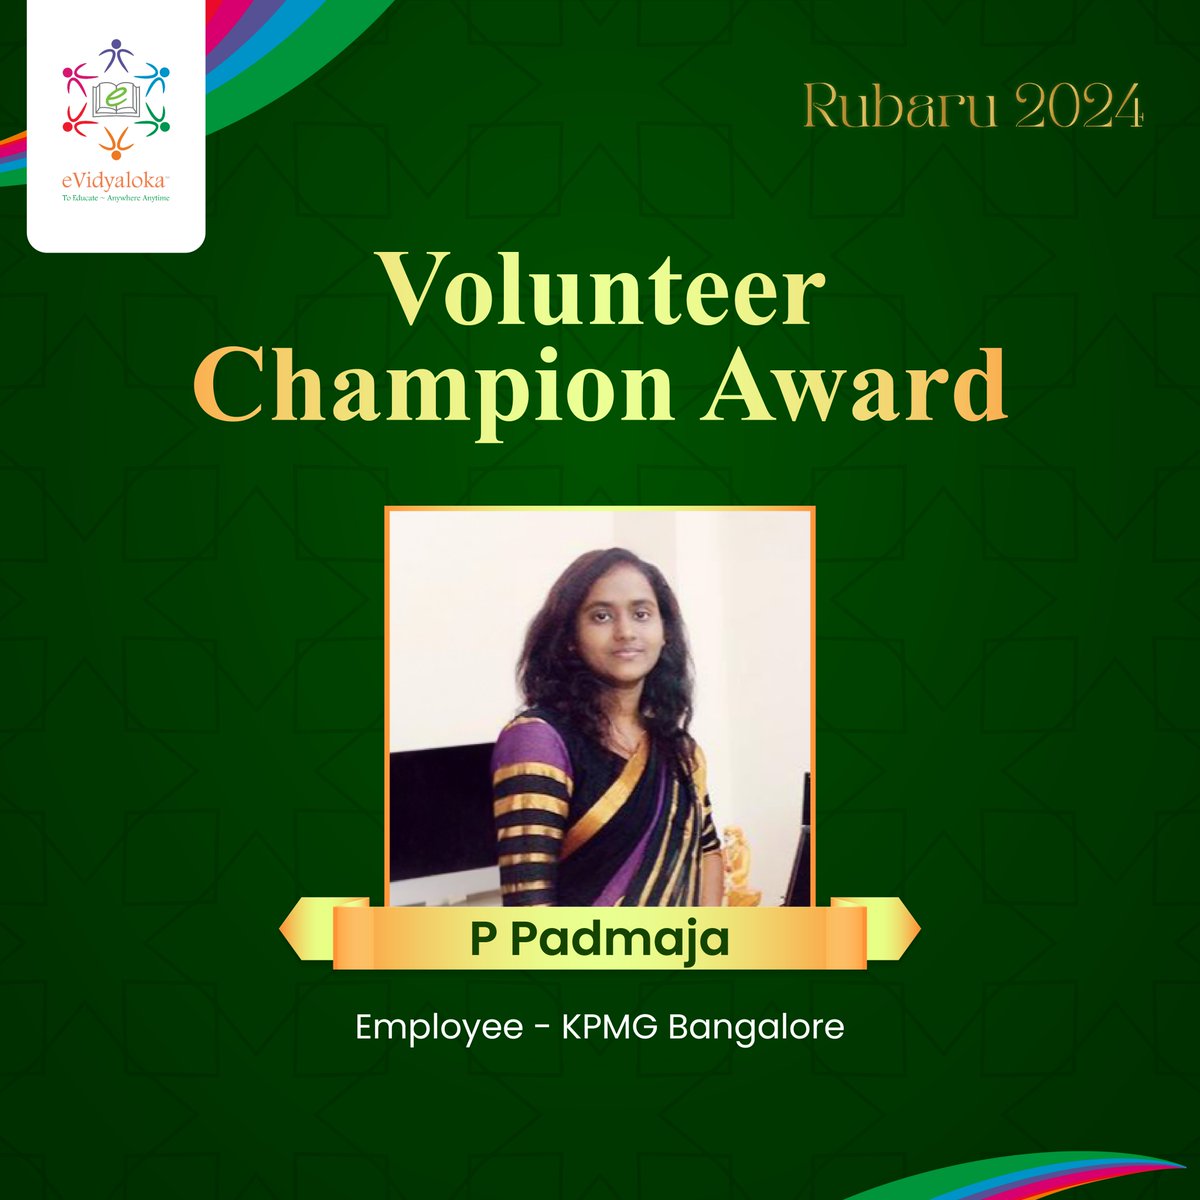 RUBARU 2024 was a testament to the incredible impact of eVidyaloka's volunteers, who have dedicated themselves to uplifting rural students over the past academic year.
A heartfelt thank you to P Padmaja from KPMG Bangalore.

#eVidyaloka #volunteer #childdevelopment